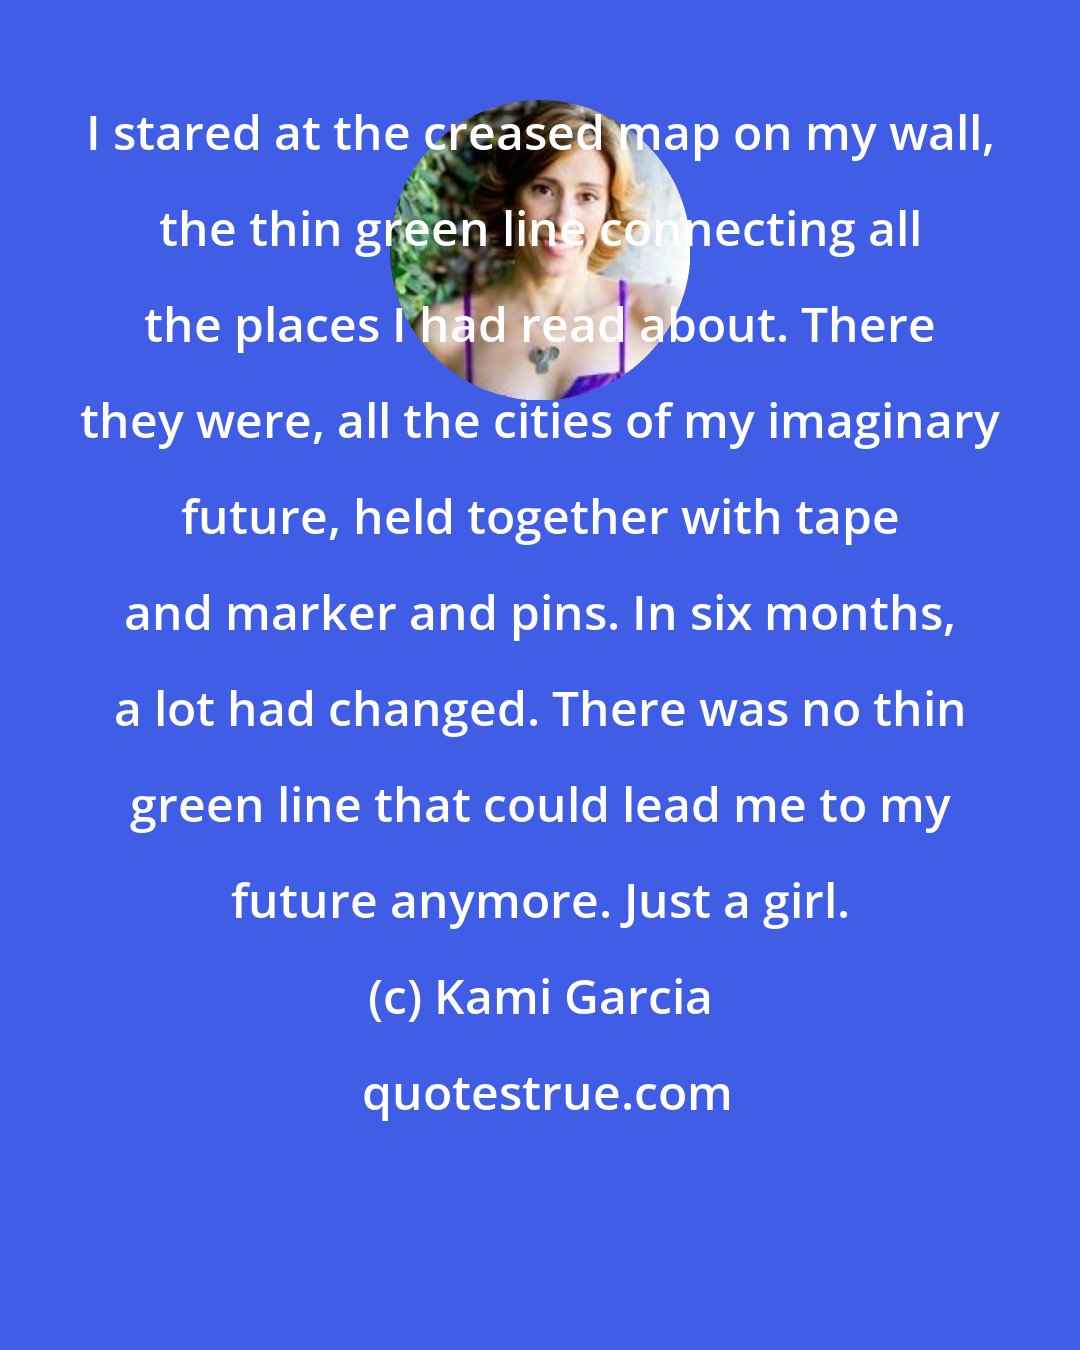 Kami Garcia: I stared at the creased map on my wall, the thin green line connecting all the places I had read about. There they were, all the cities of my imaginary future, held together with tape and marker and pins. In six months, a lot had changed. There was no thin green line that could lead me to my future anymore. Just a girl.